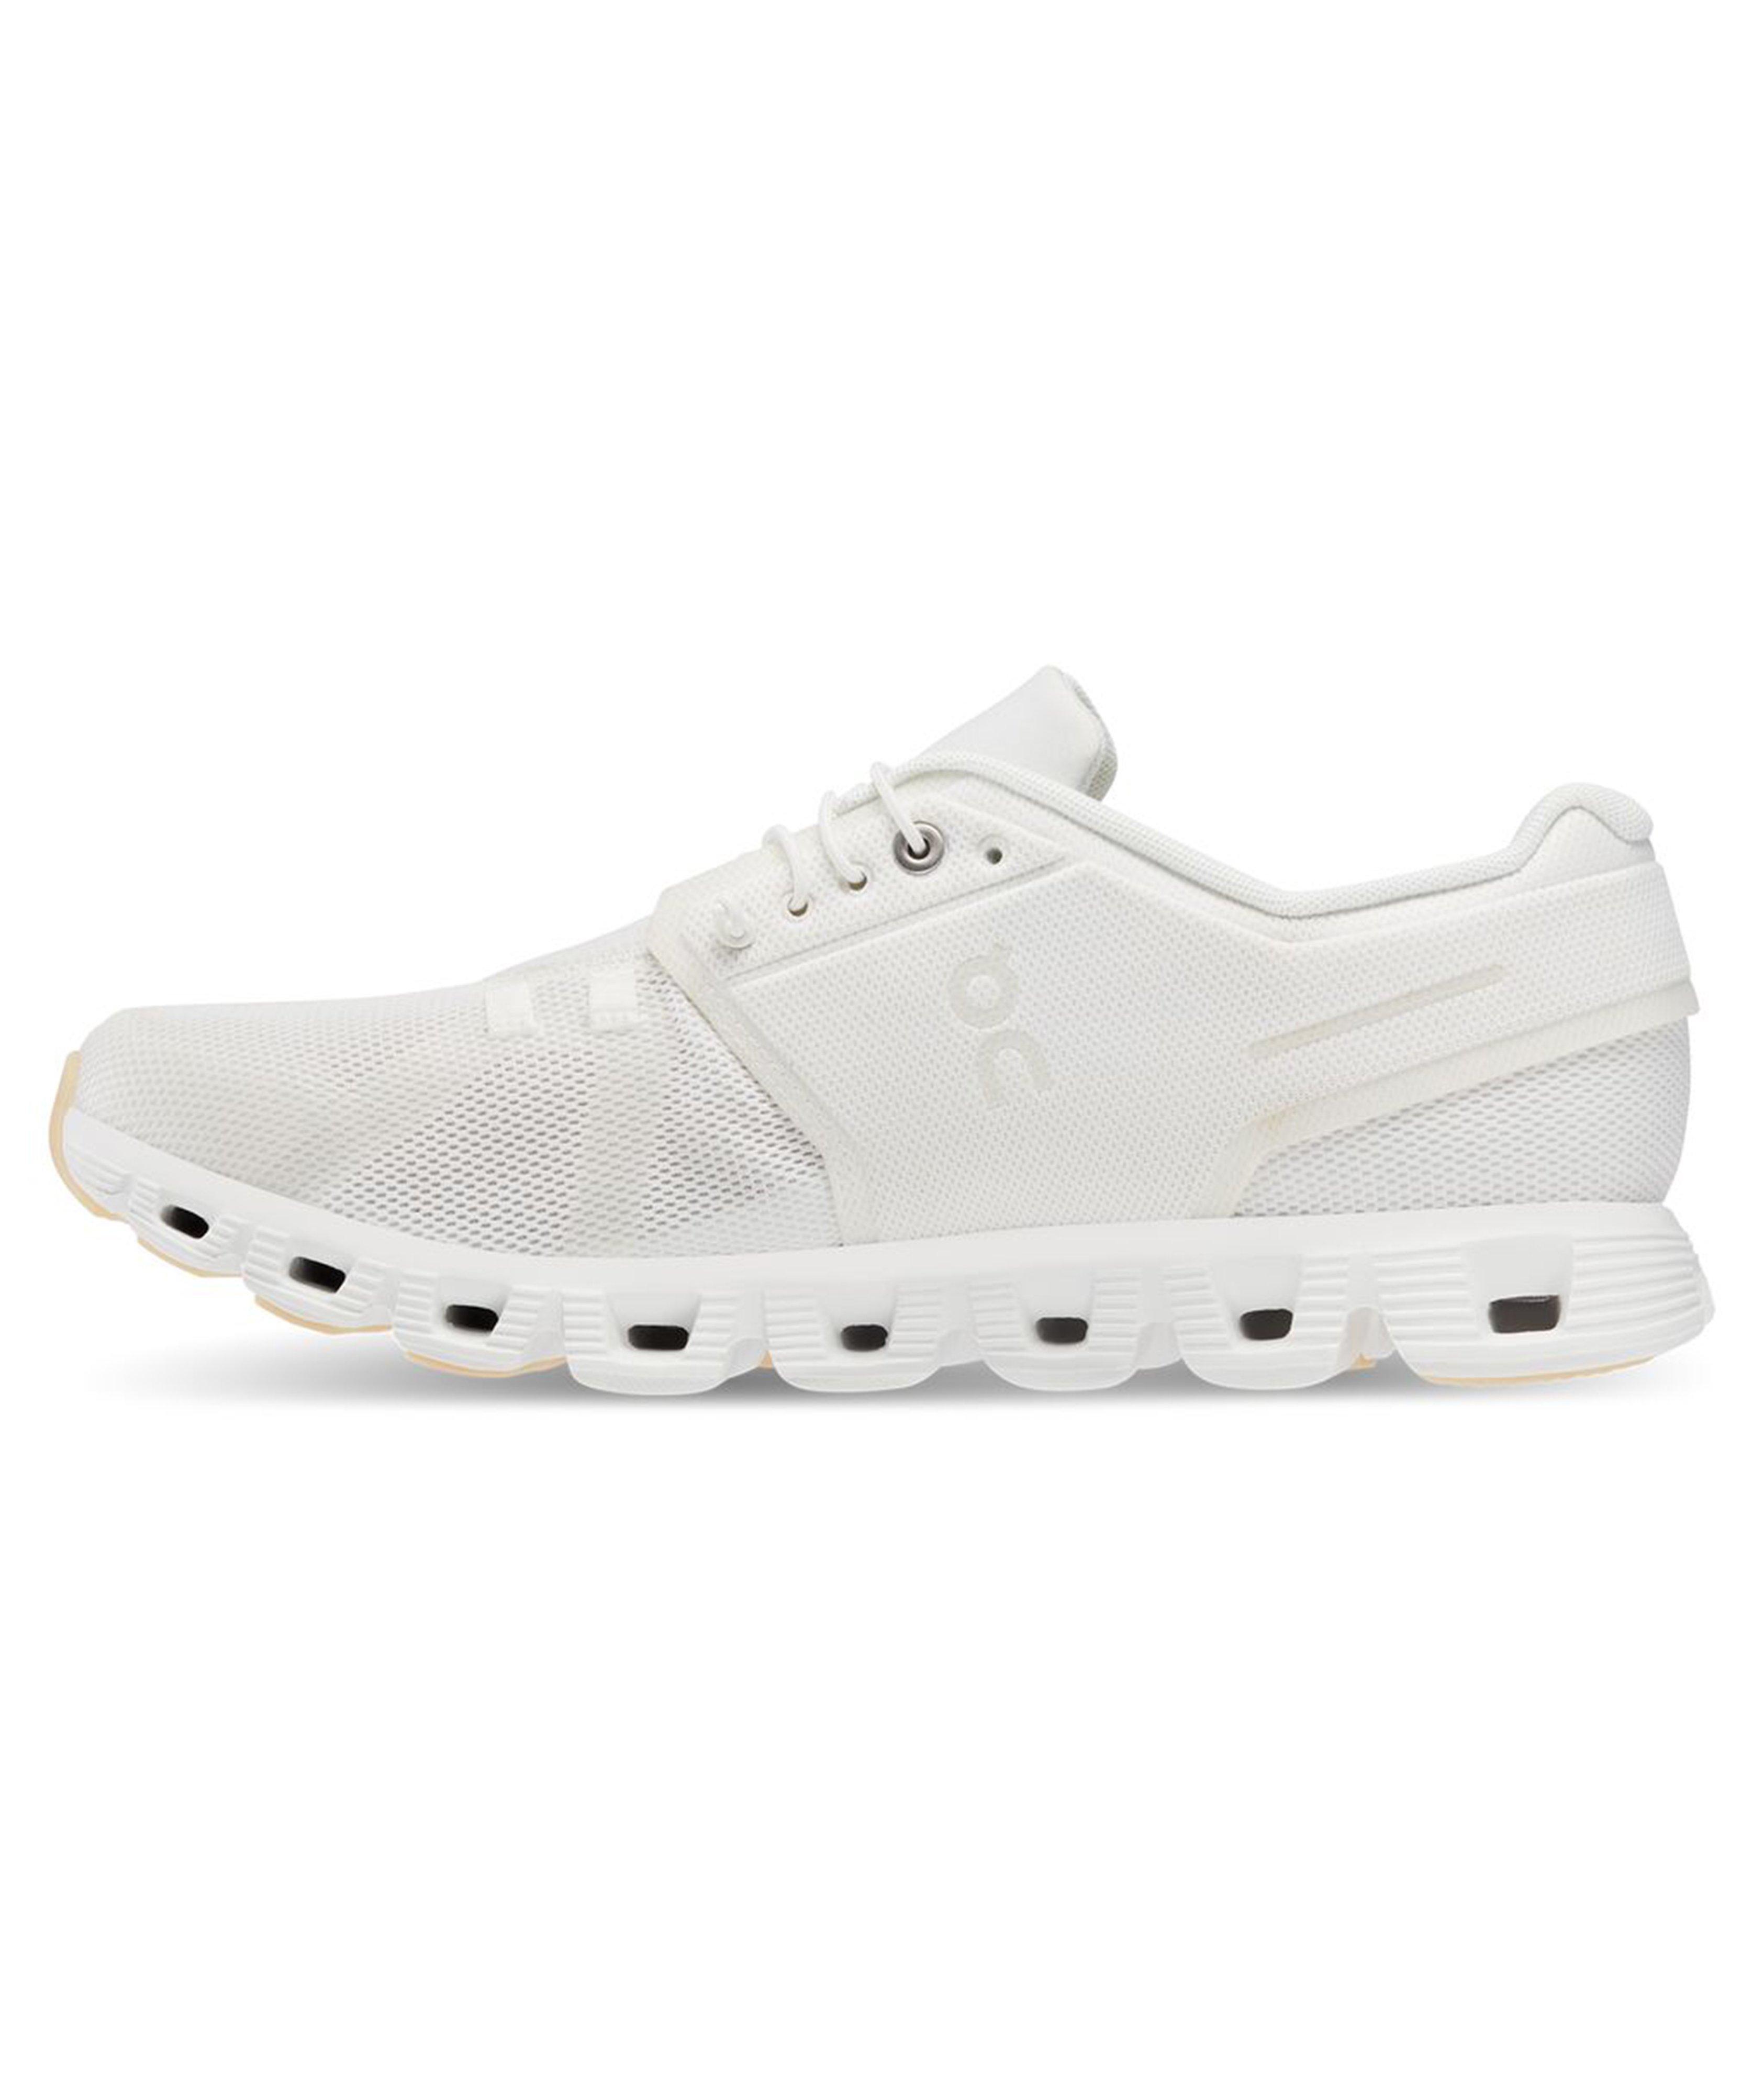 Cloud 5 Undyed Running Shoes image 1